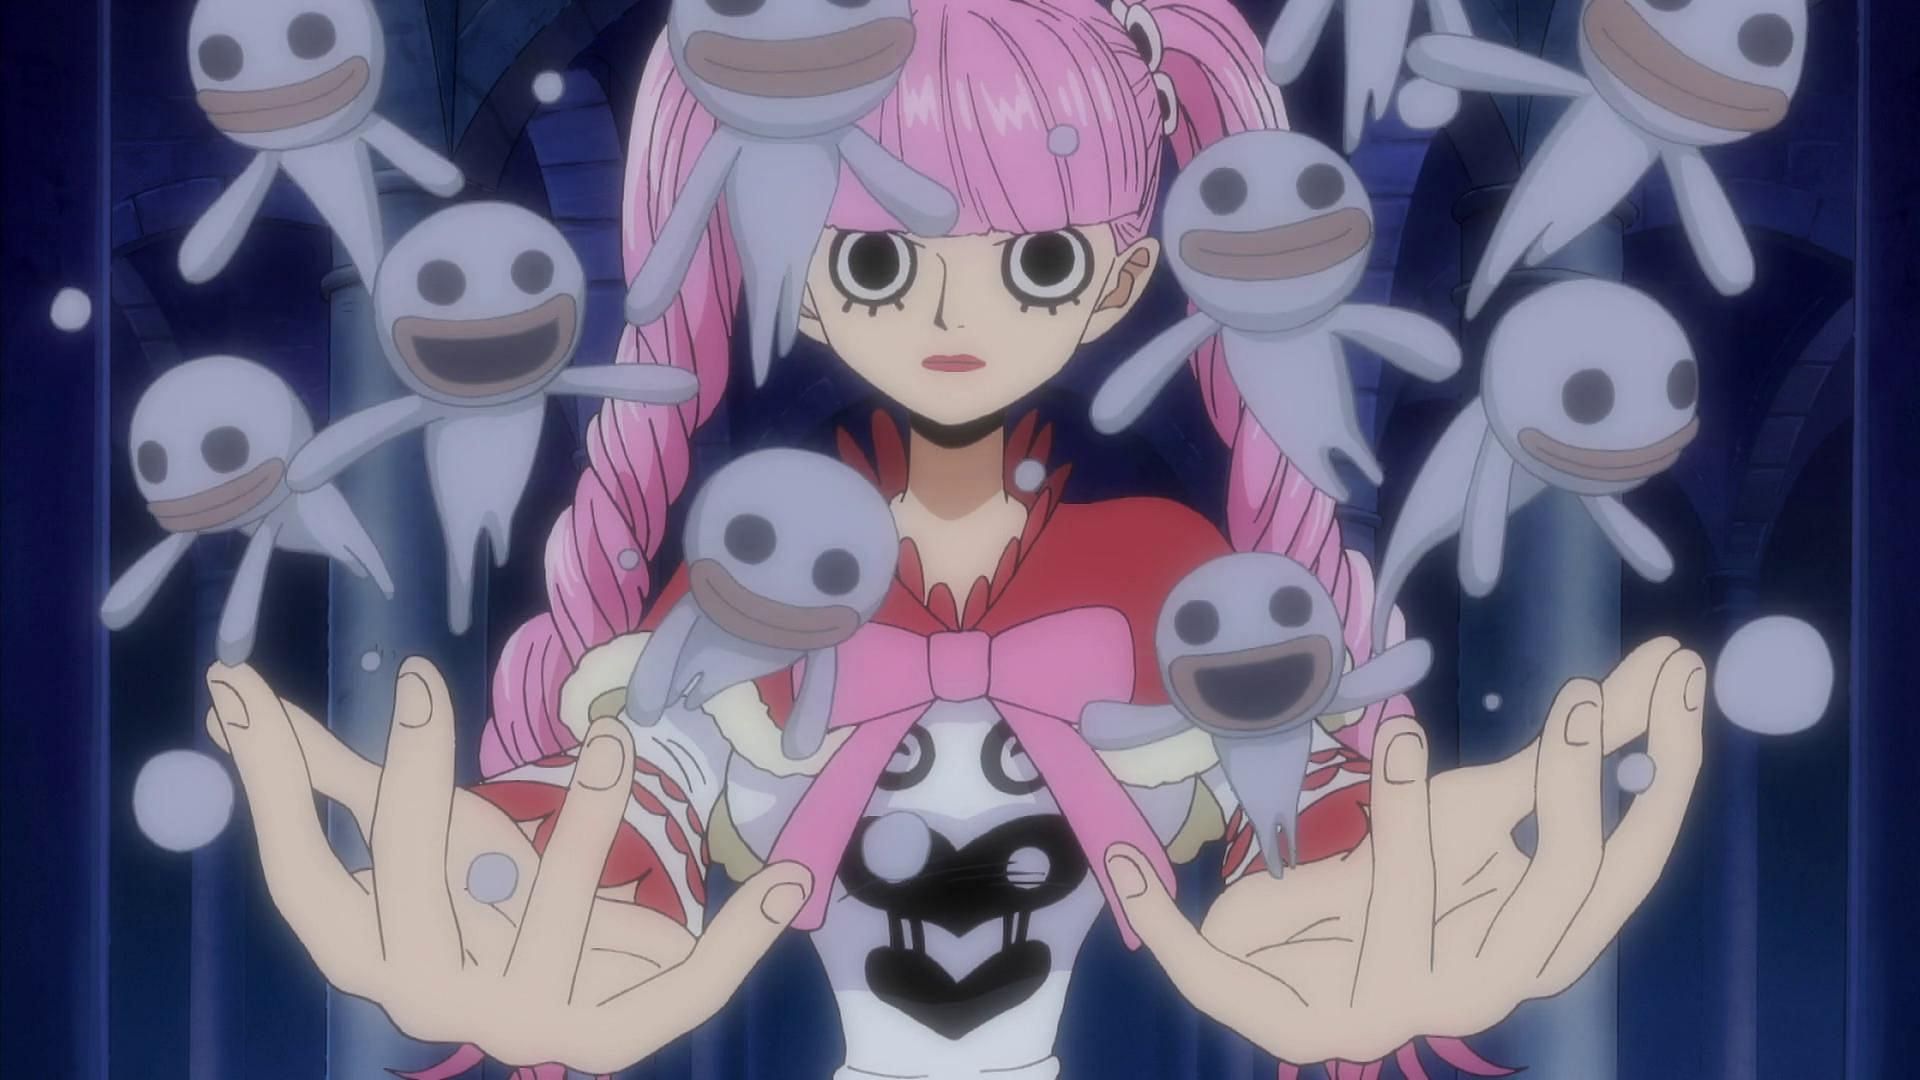 With her Hollow-Hollow Fruit, Perona can create and control various types of ghosts (Image via Toei Animation, One Piece)